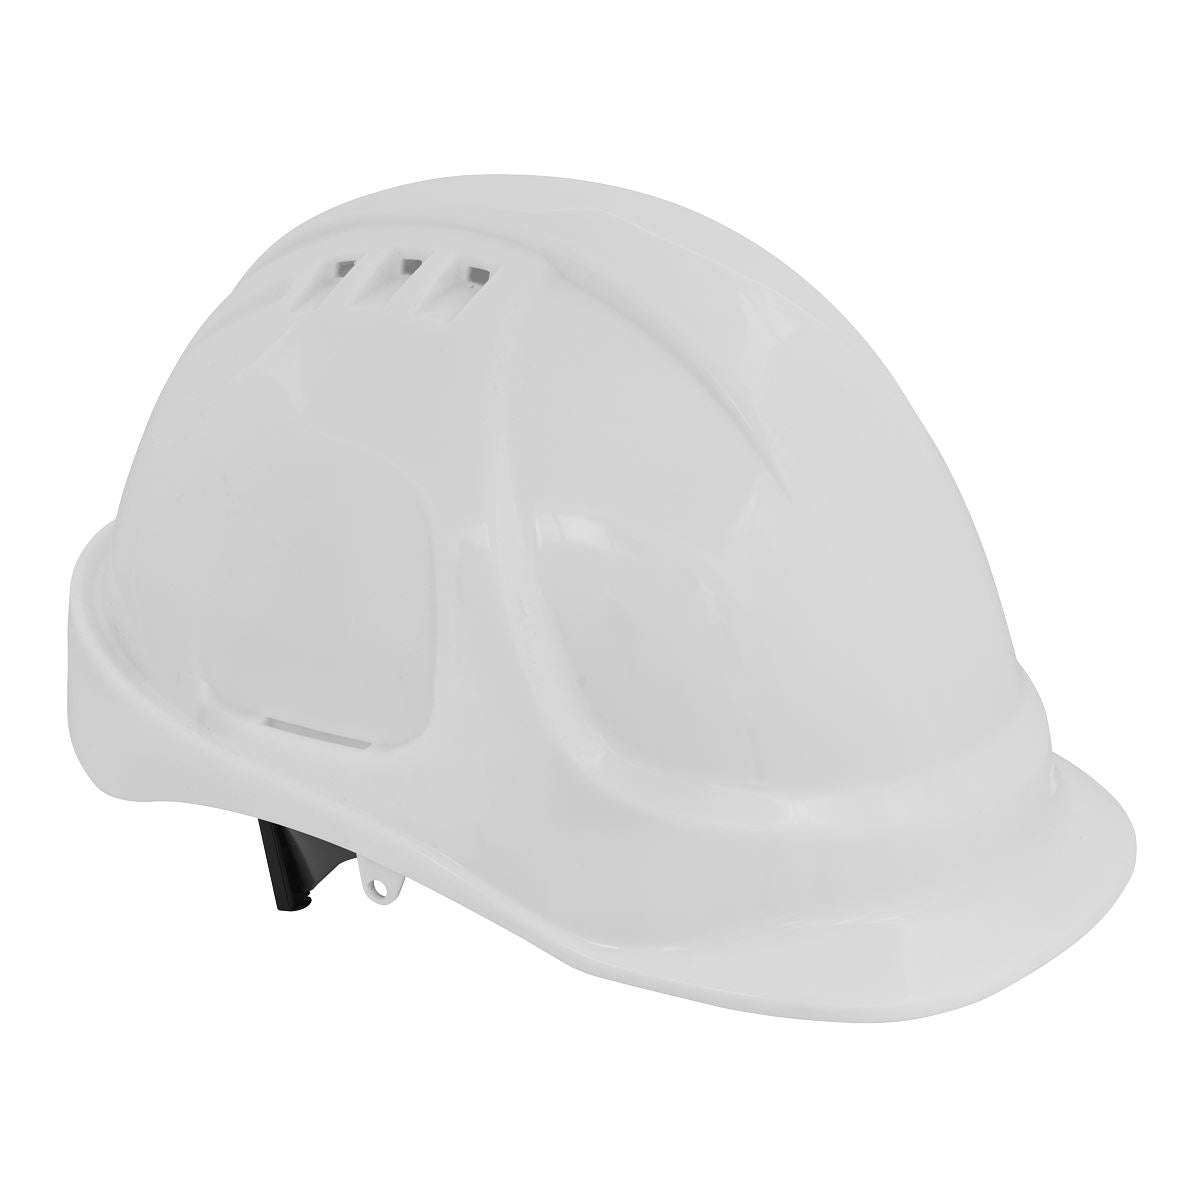 Worksafe by Sealey Safety Helmet - Vented (White)